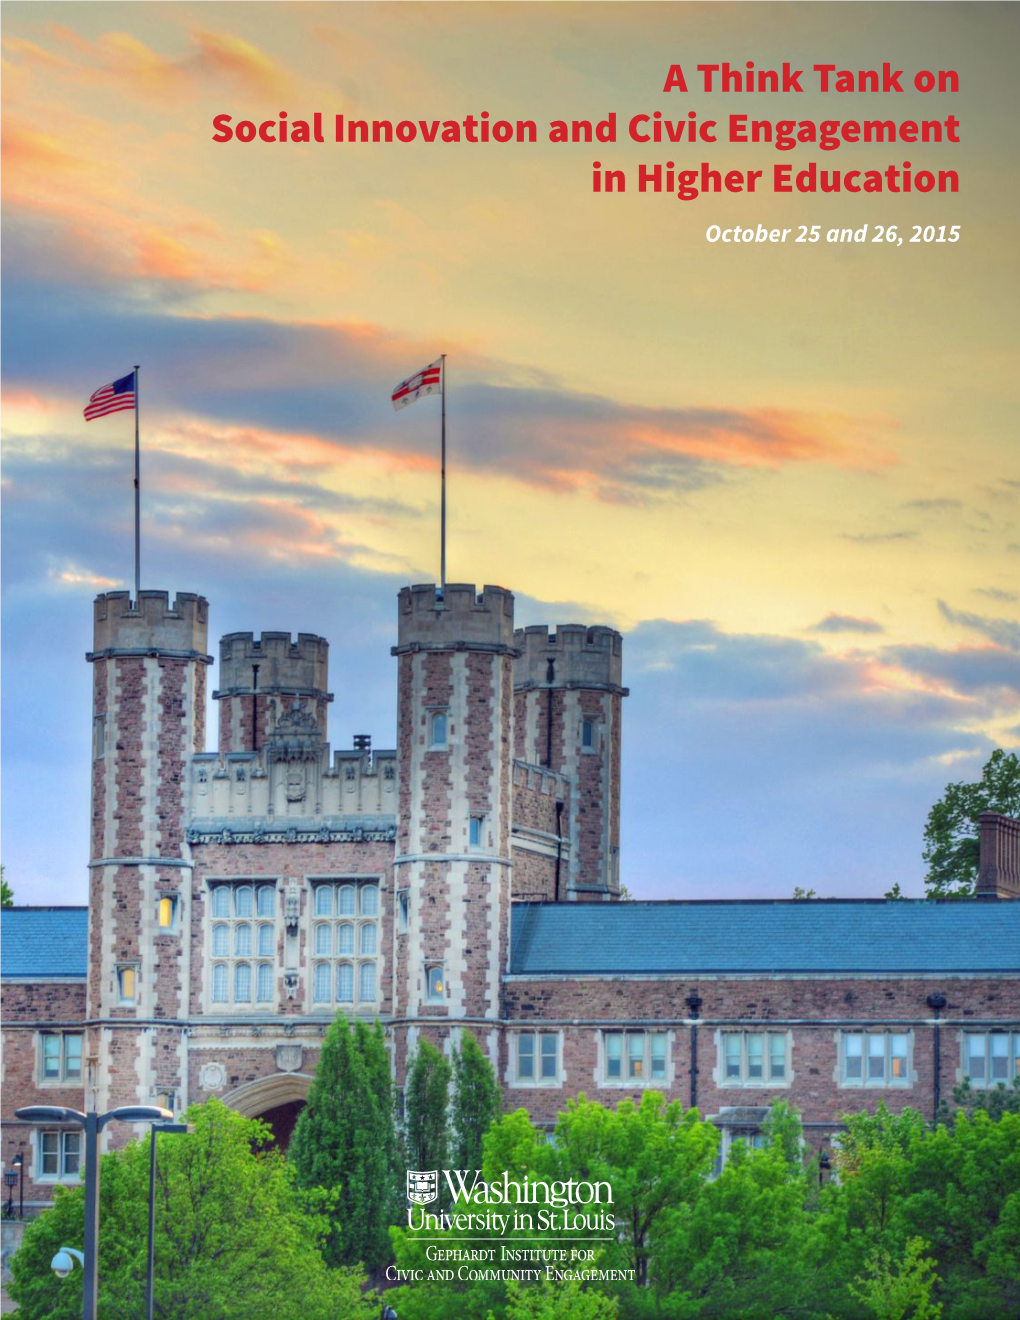 A Think Tank on Social Innovation and Civic Engagement in Higher Education October 25 and 26, 2015